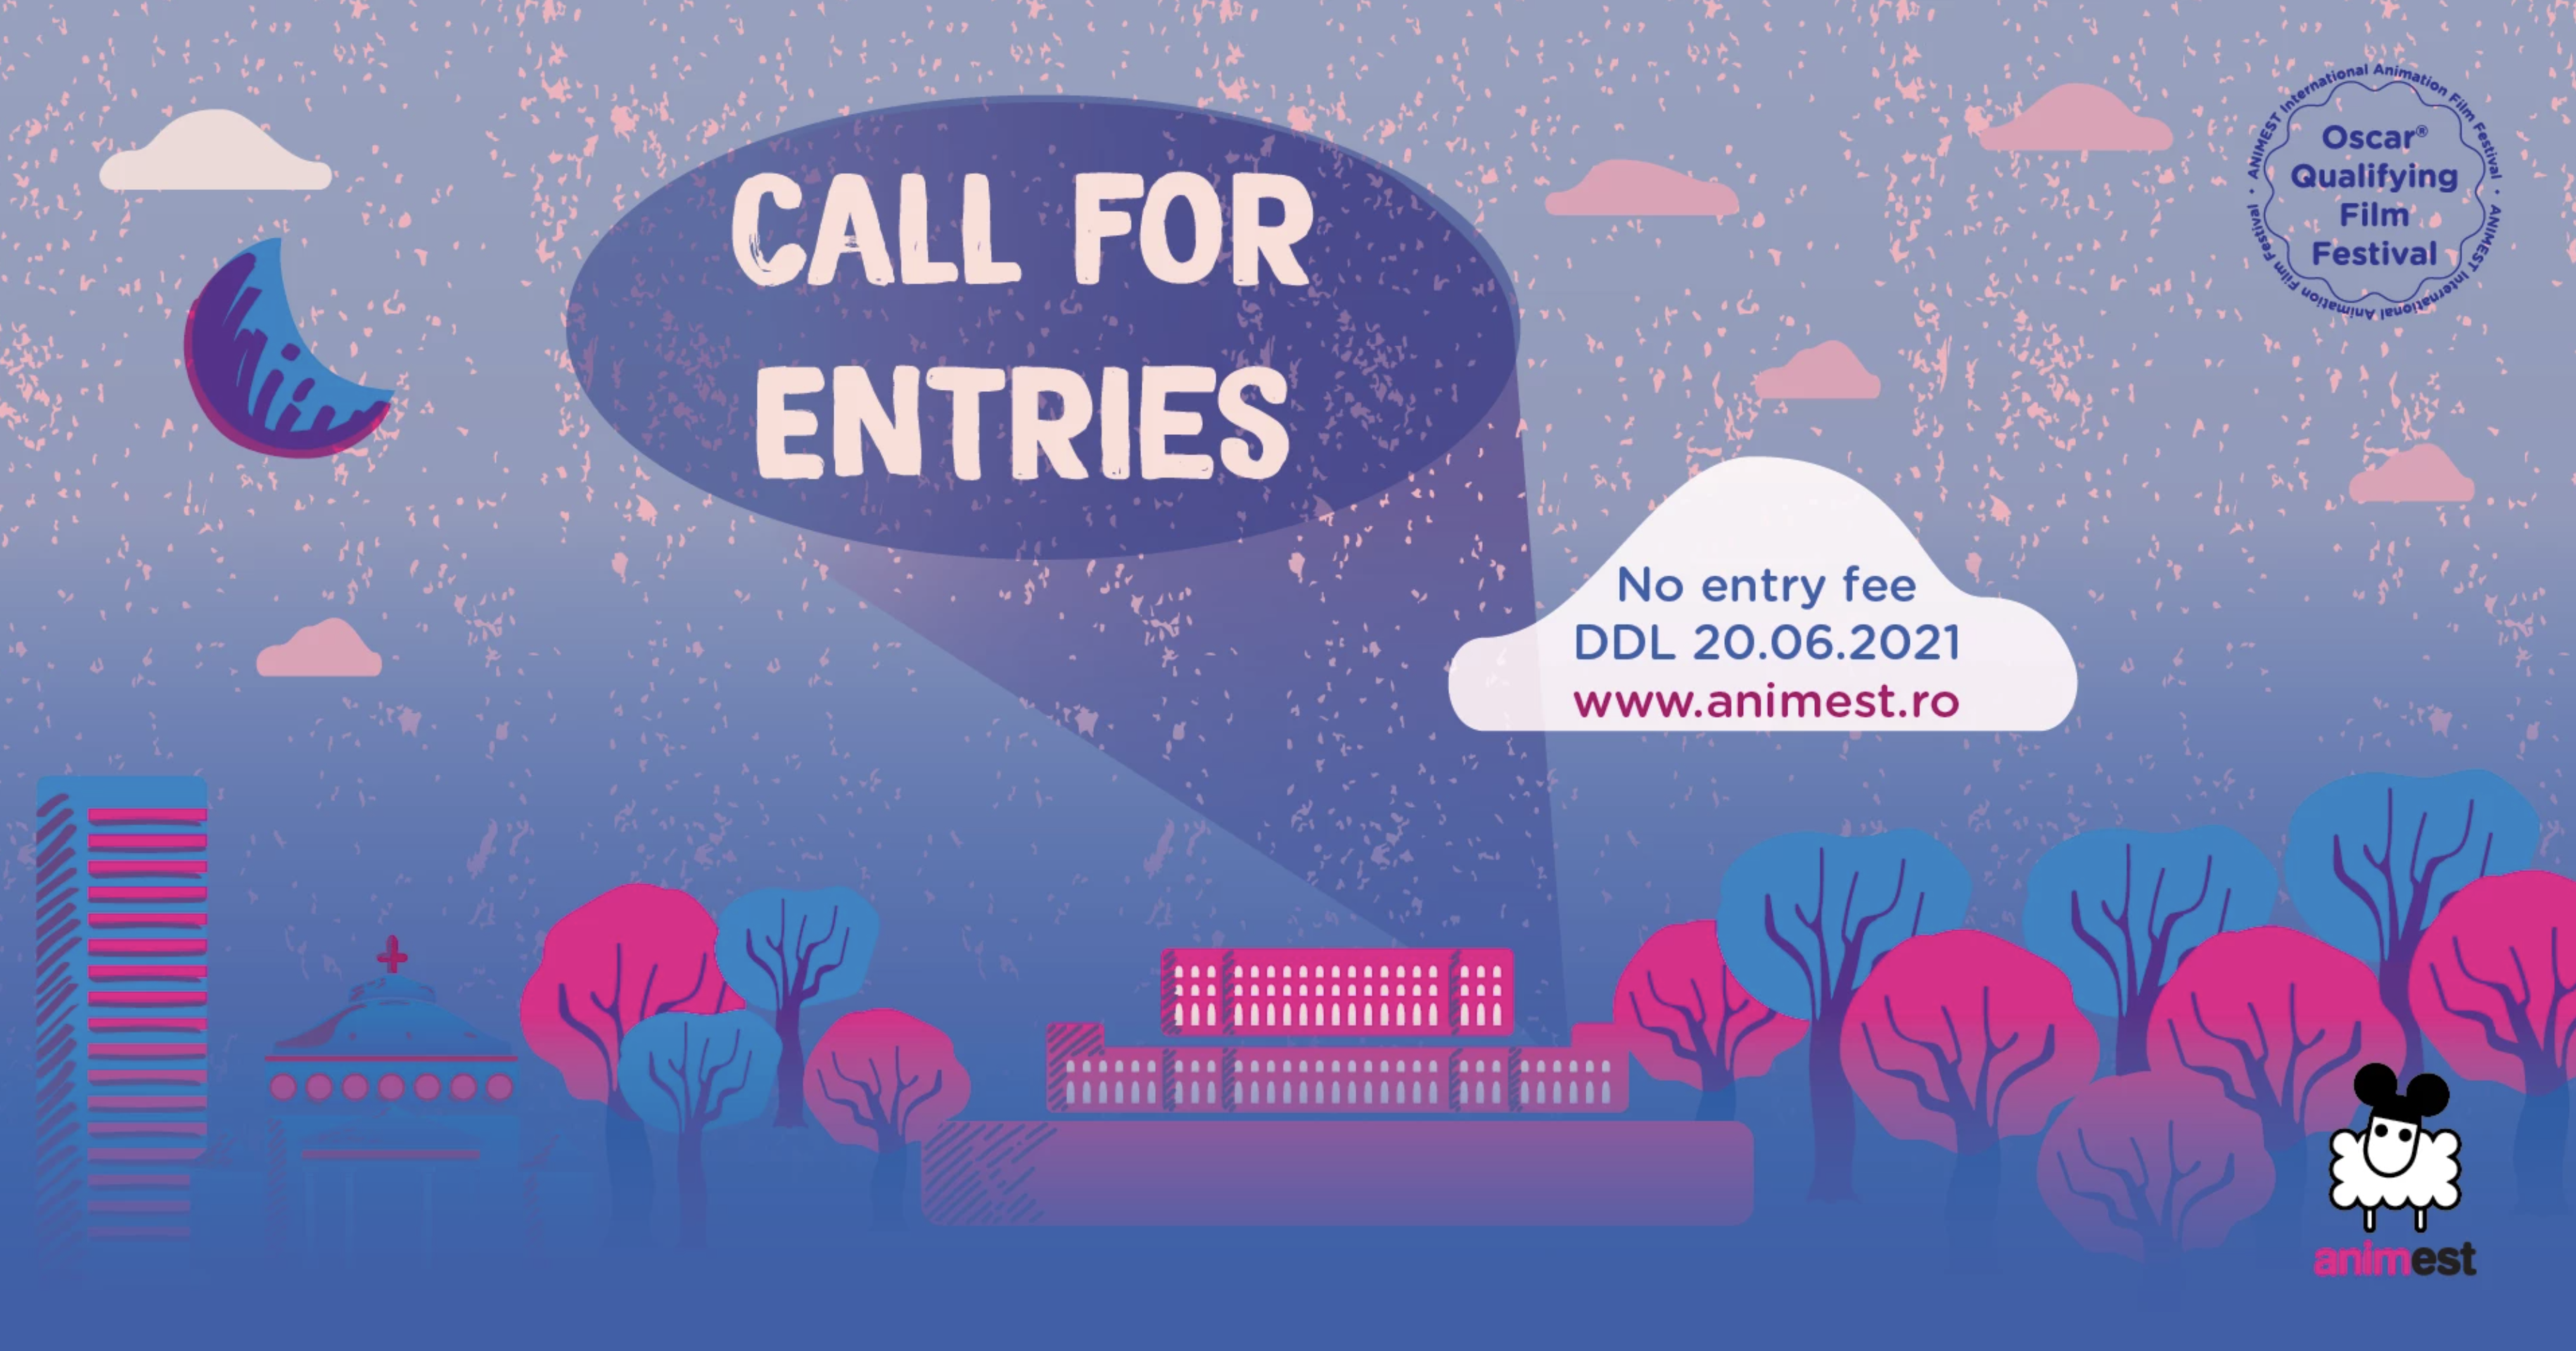 The 16th Edition of Animest Call for Entries